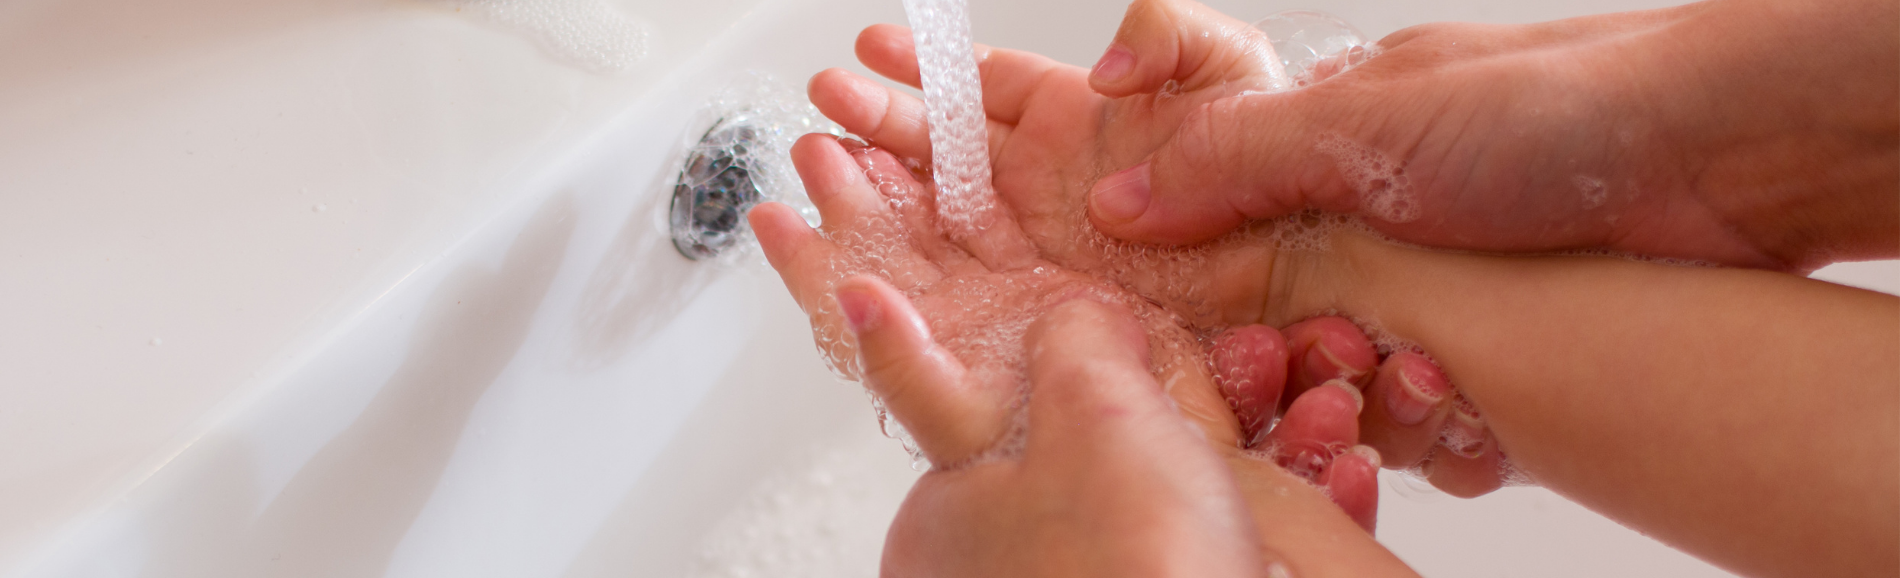 Child washing hands with adult assistance.